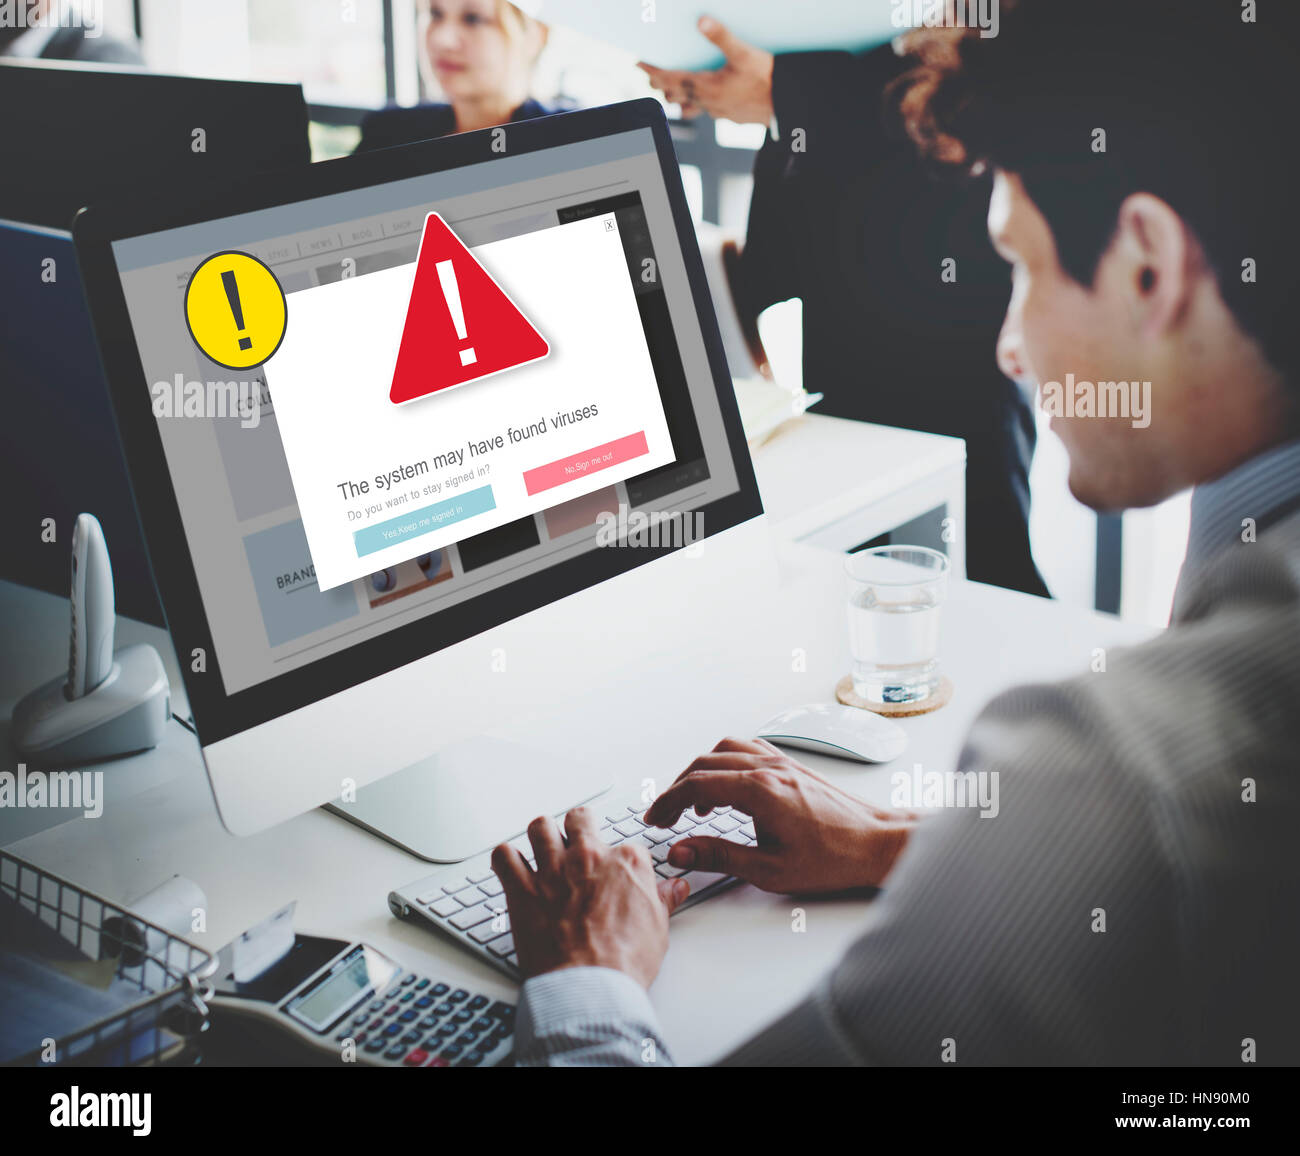 Exclamation Warning Caution Popup Concept Stock Photo